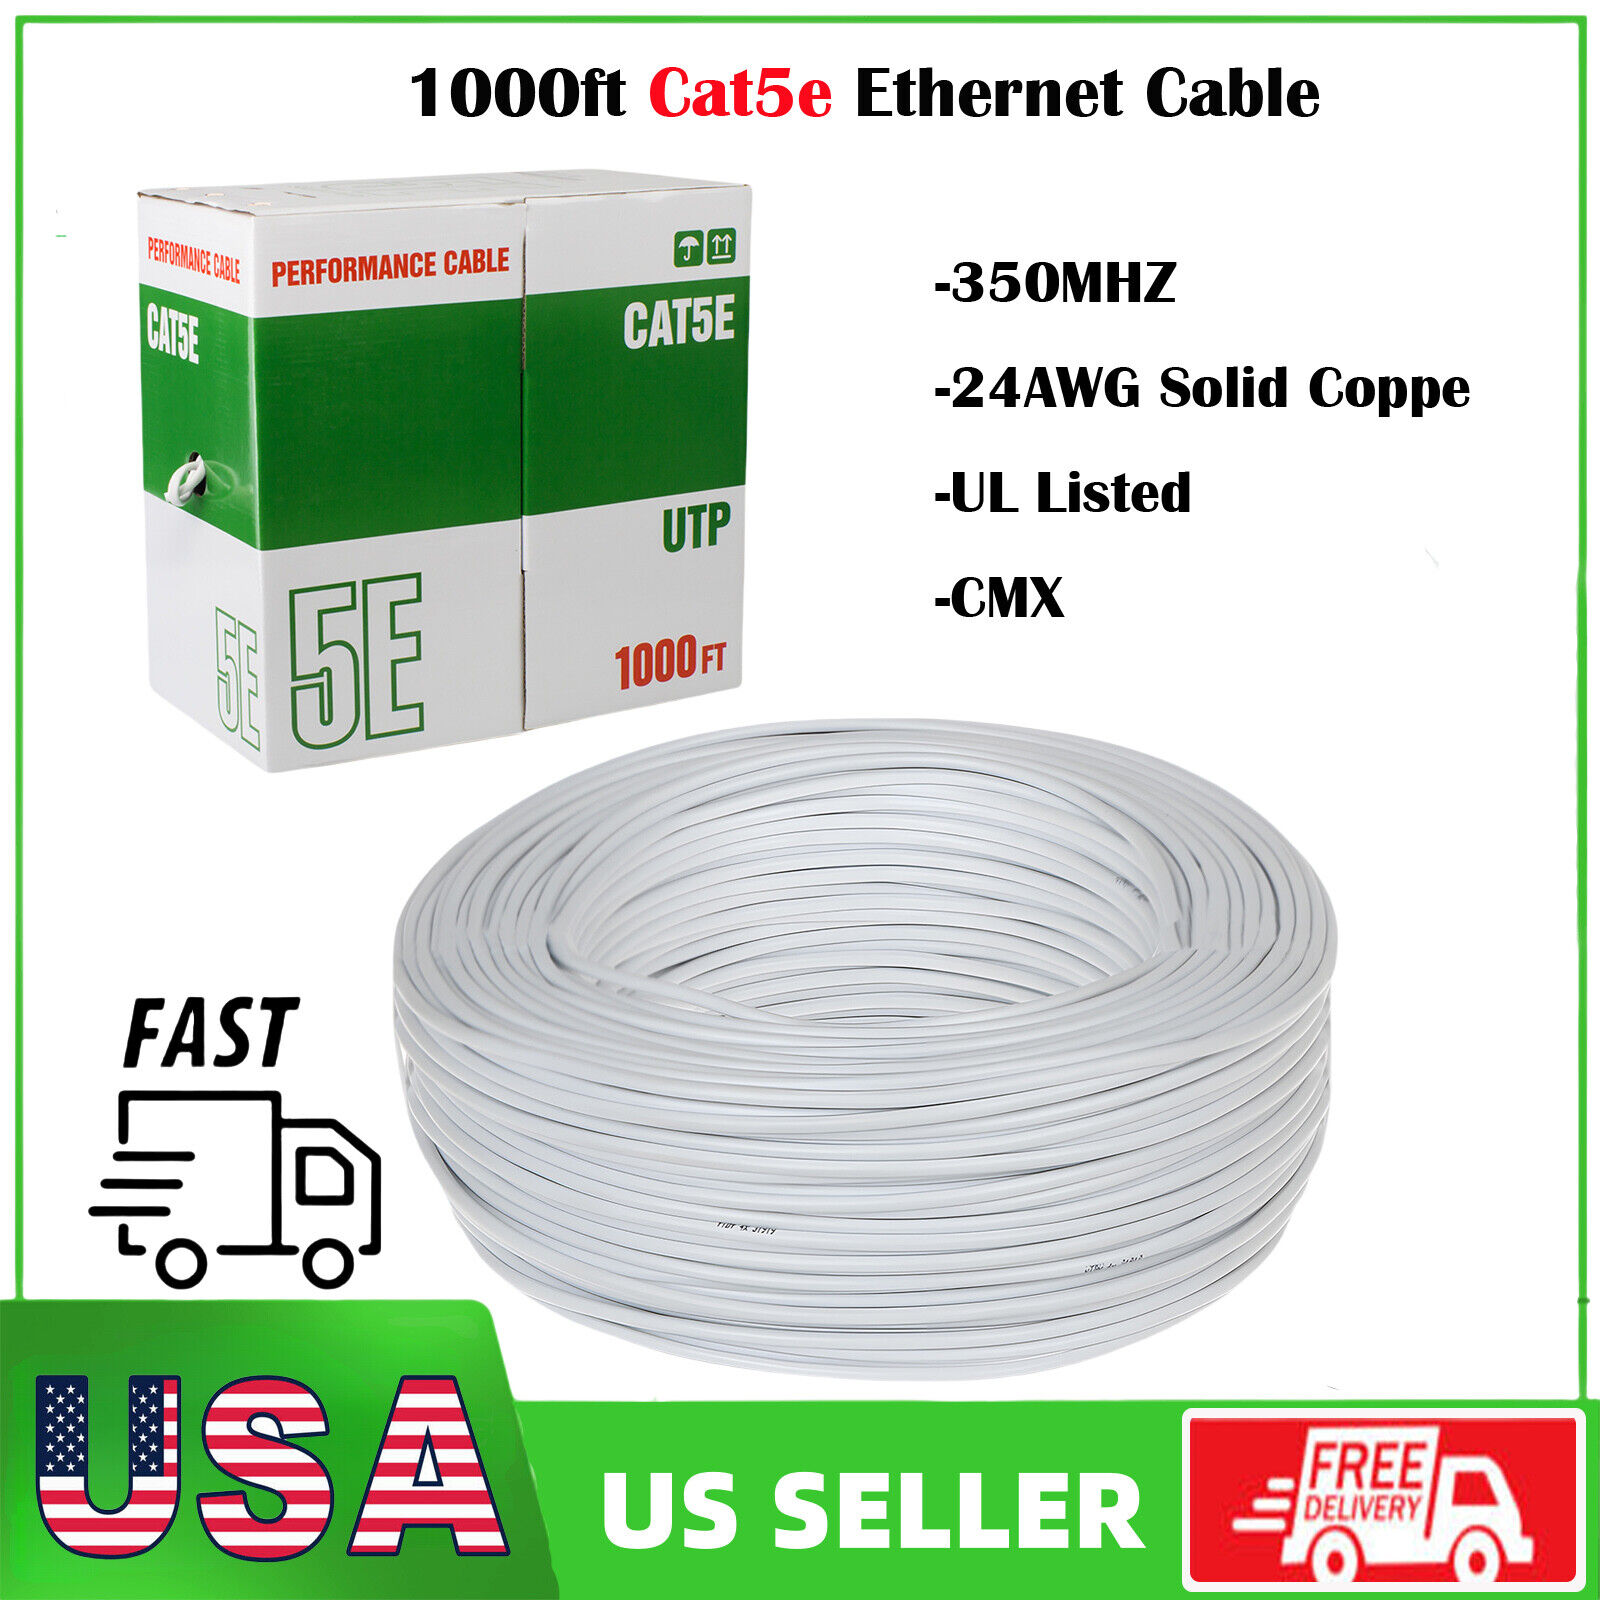 1000ft Cat6/Cat5e Ethernet Cable 23AWG Solid Coppe UTP Network Bulk Wire Lan